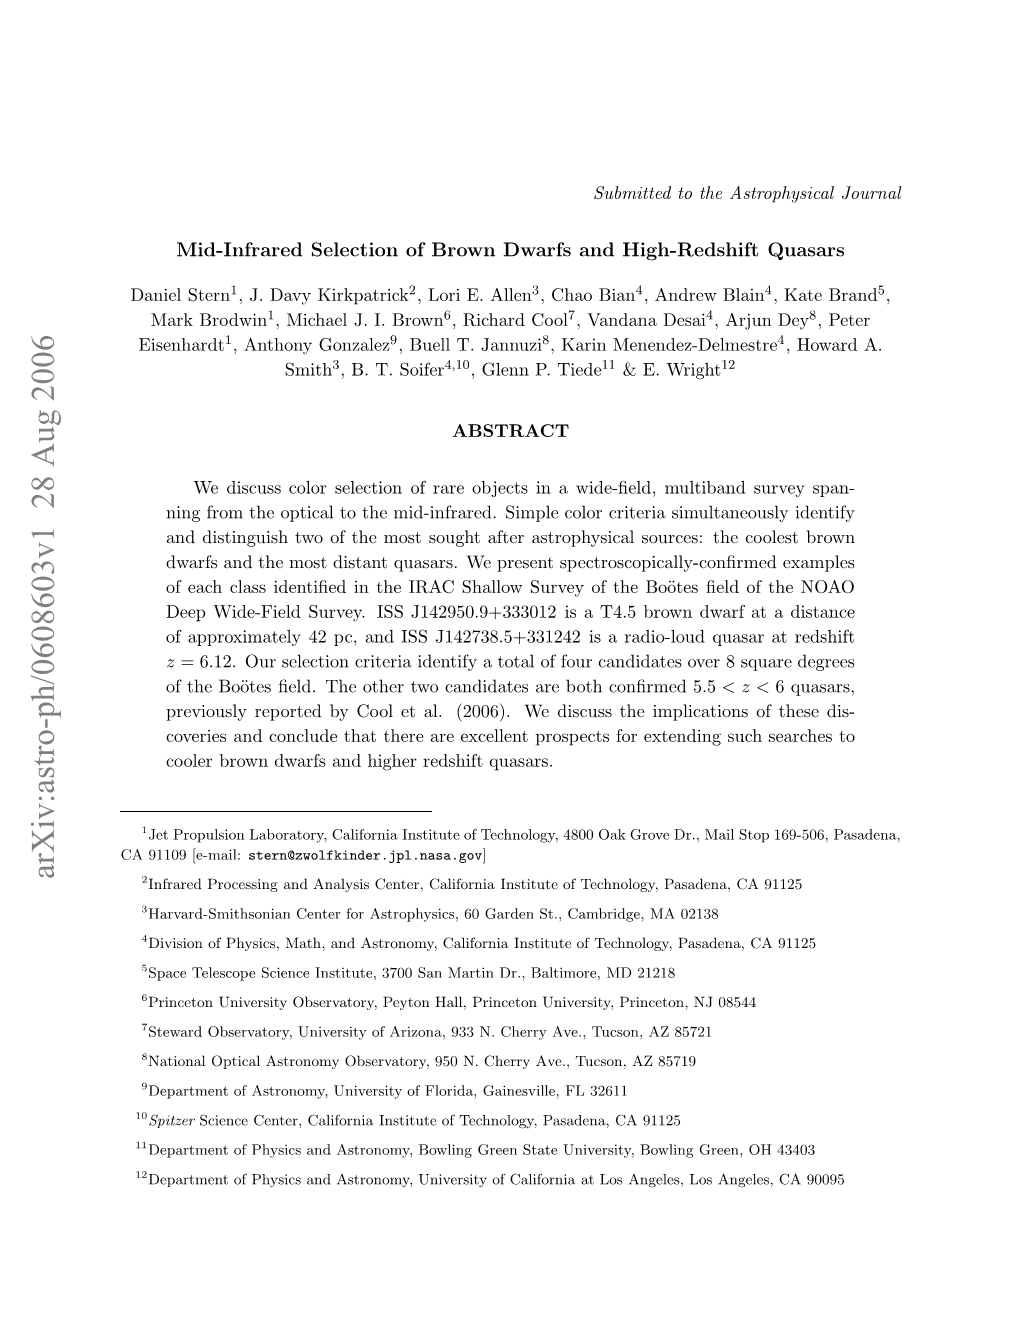 Mid-Infrared Selection of Brown Dwarfs and High-Redshift Quasars